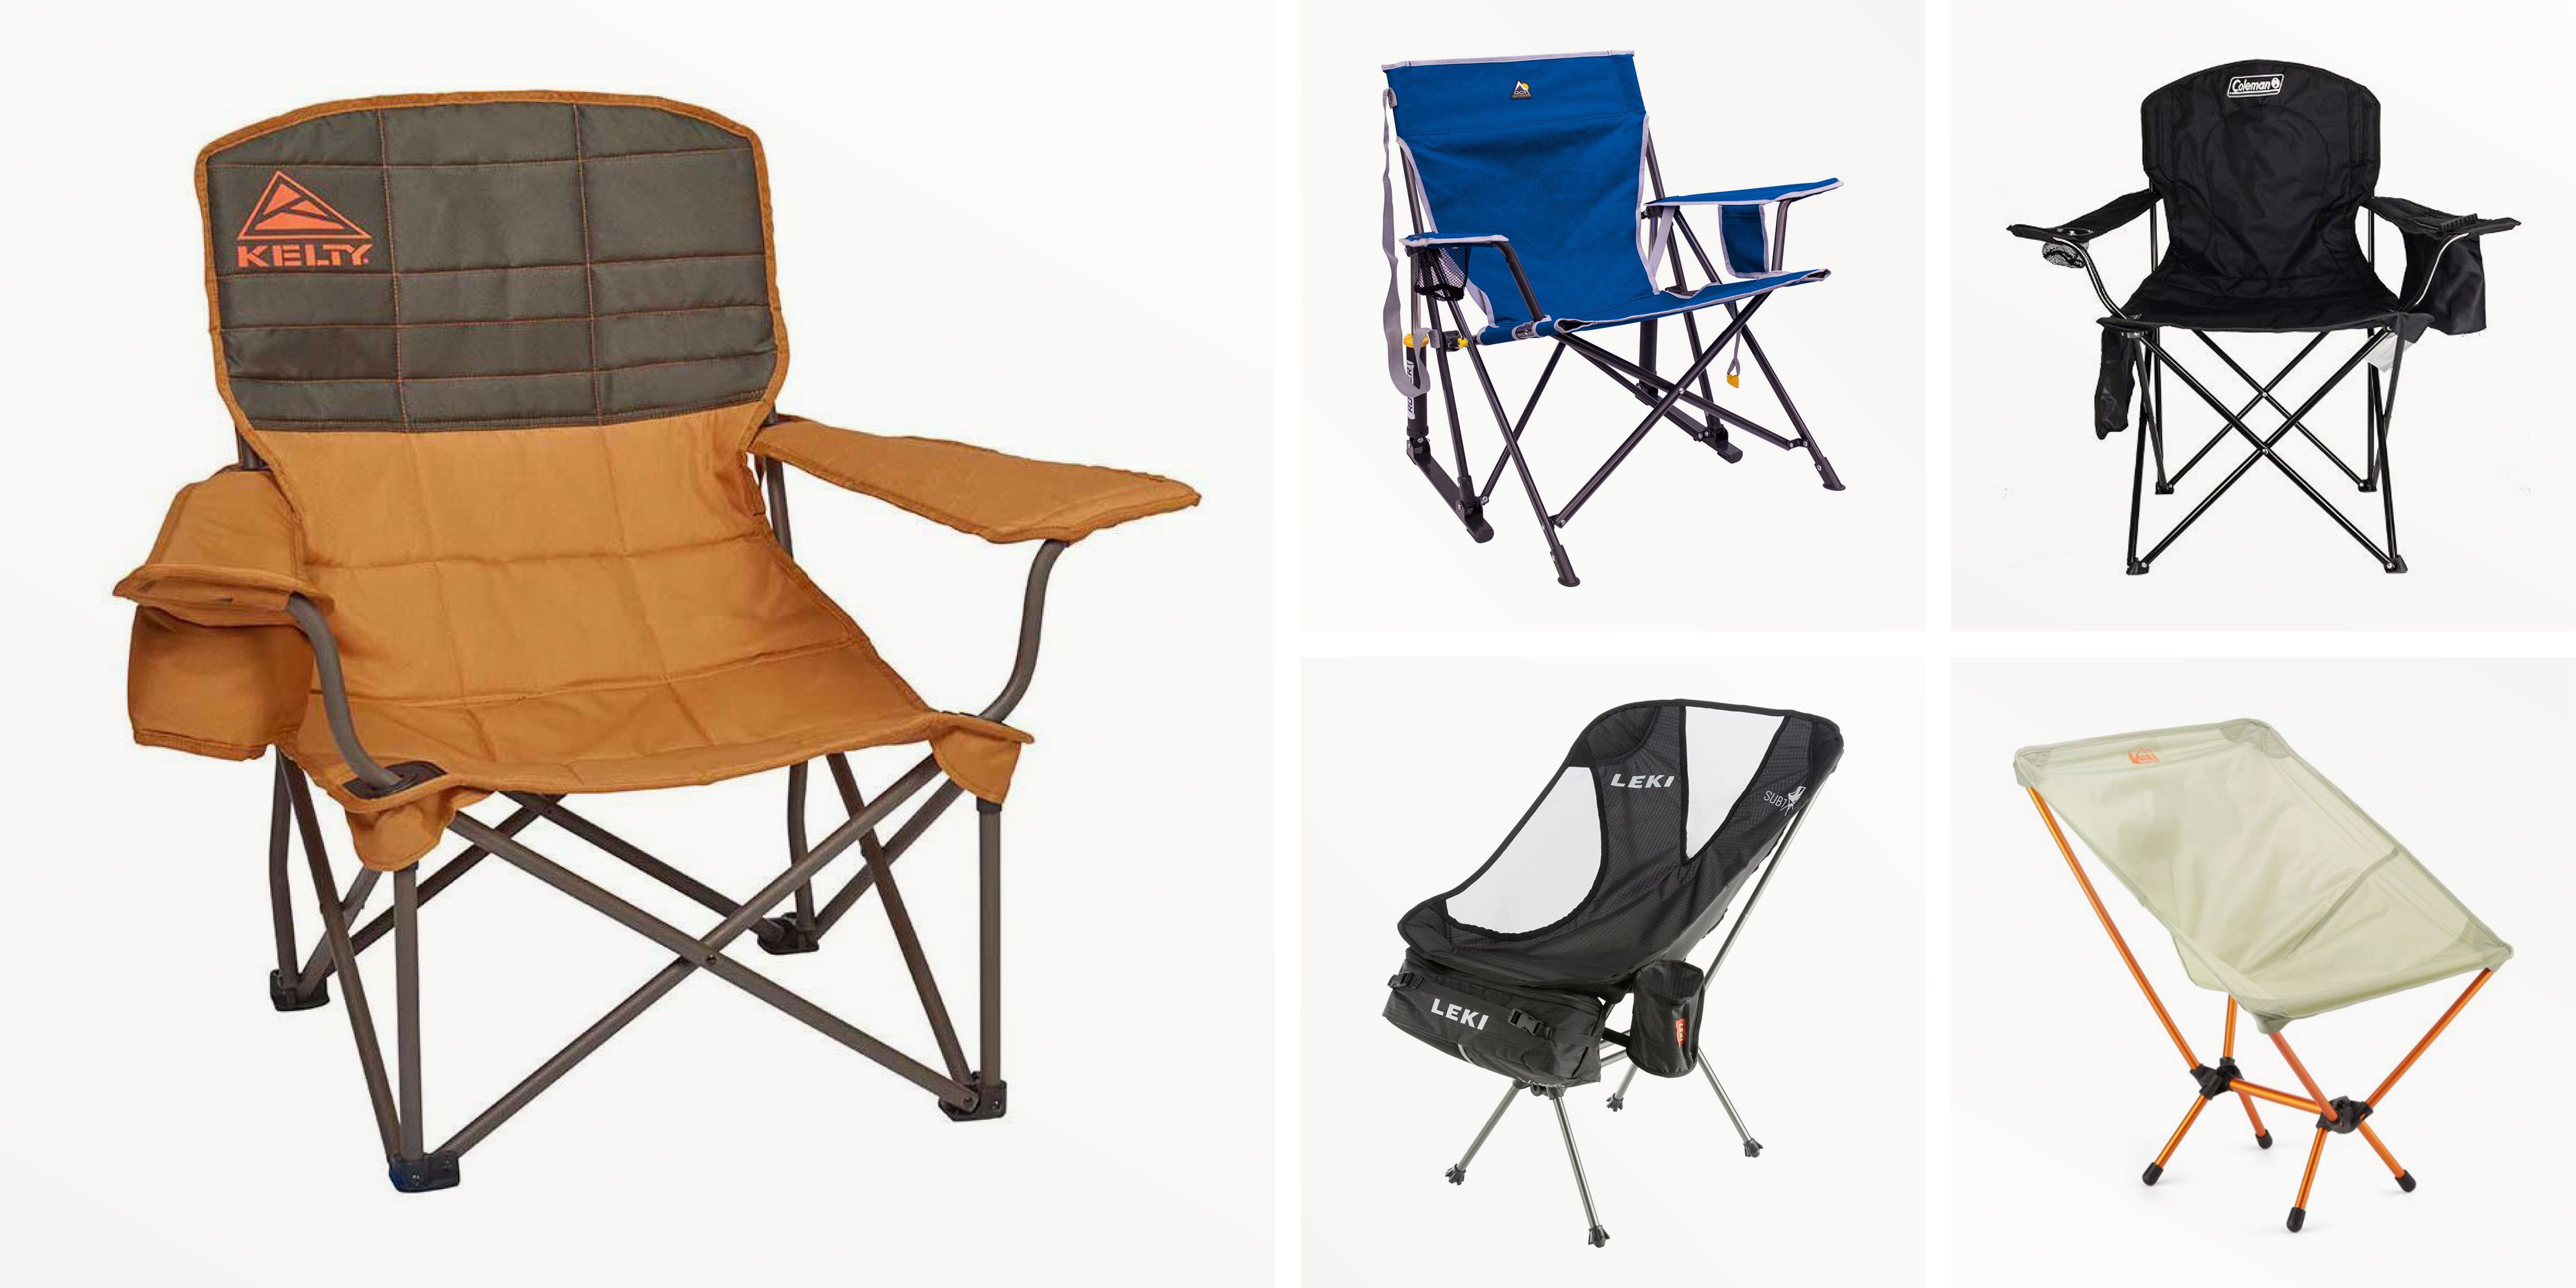 Portable Picnic Chairs Hot Sale, UP TO 69% OFF | www.aramanatural.es